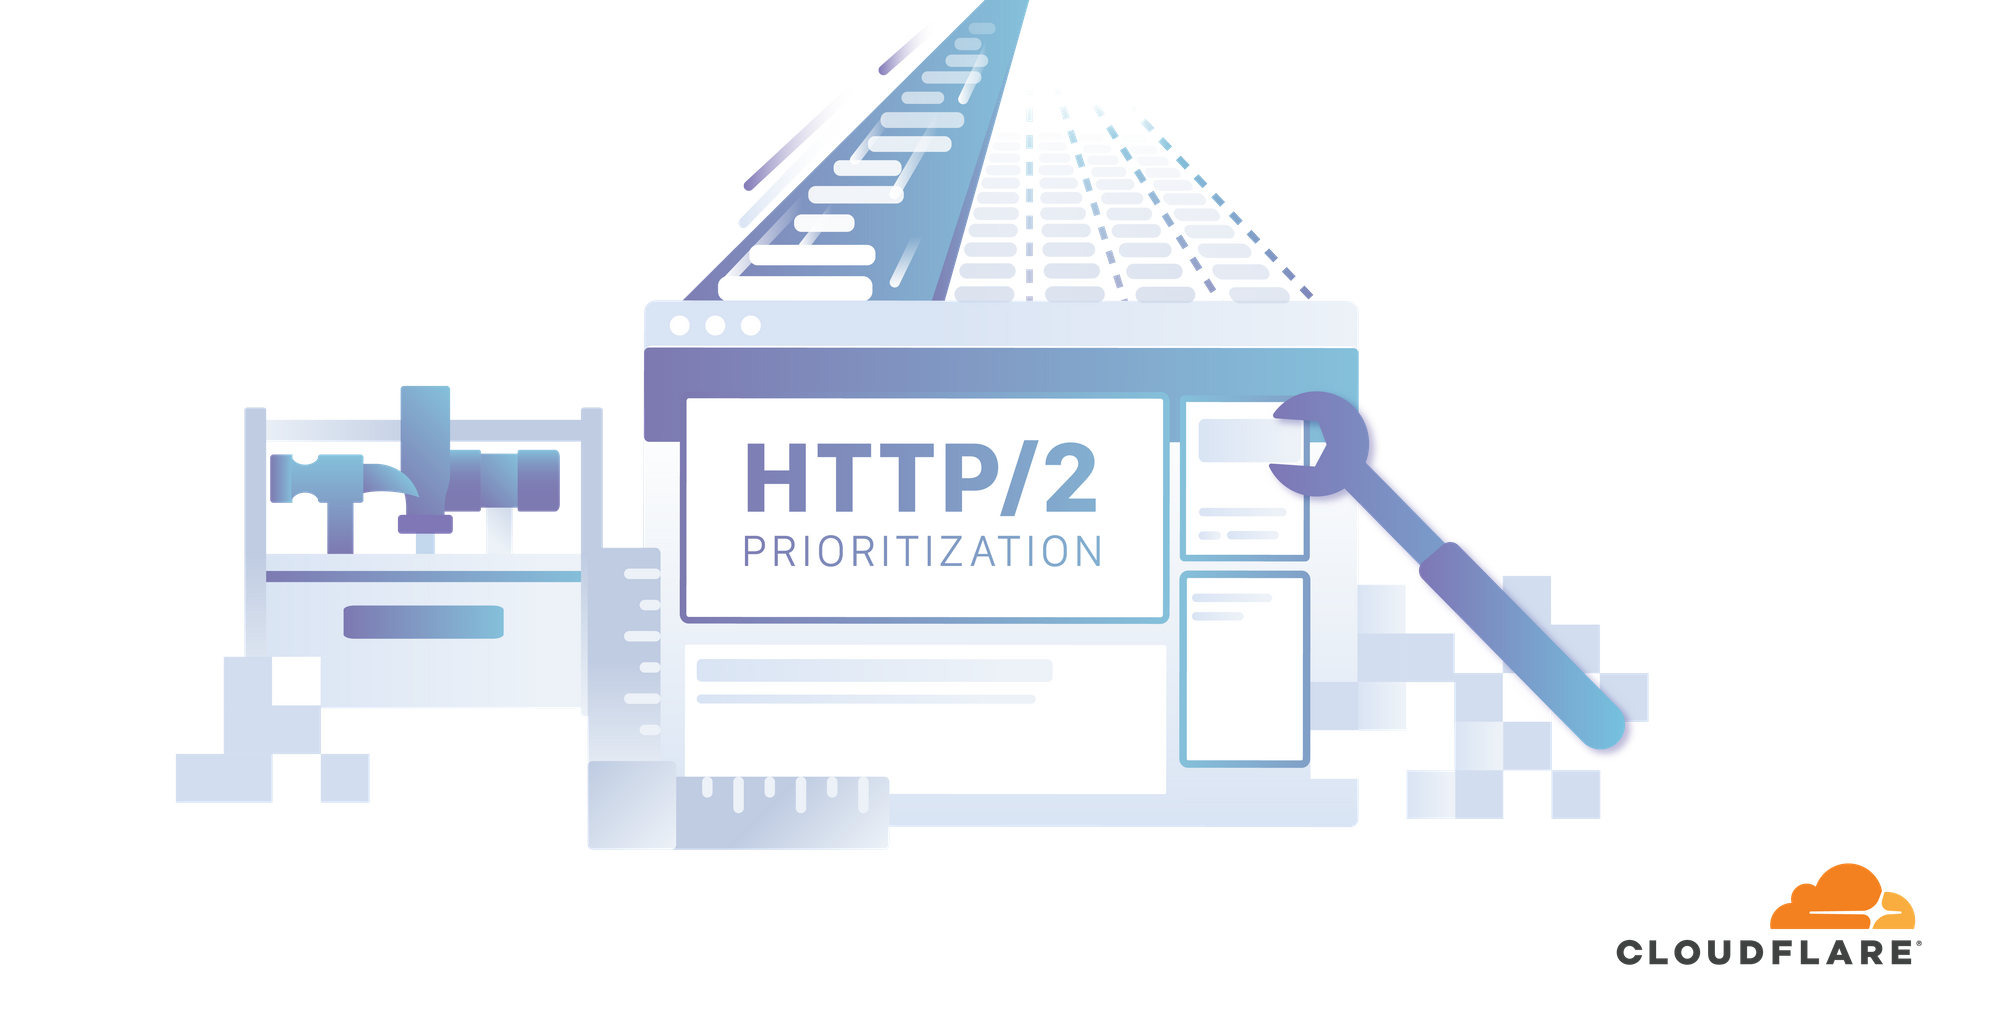 NGINX structural enhancements for HTTP/2 performance